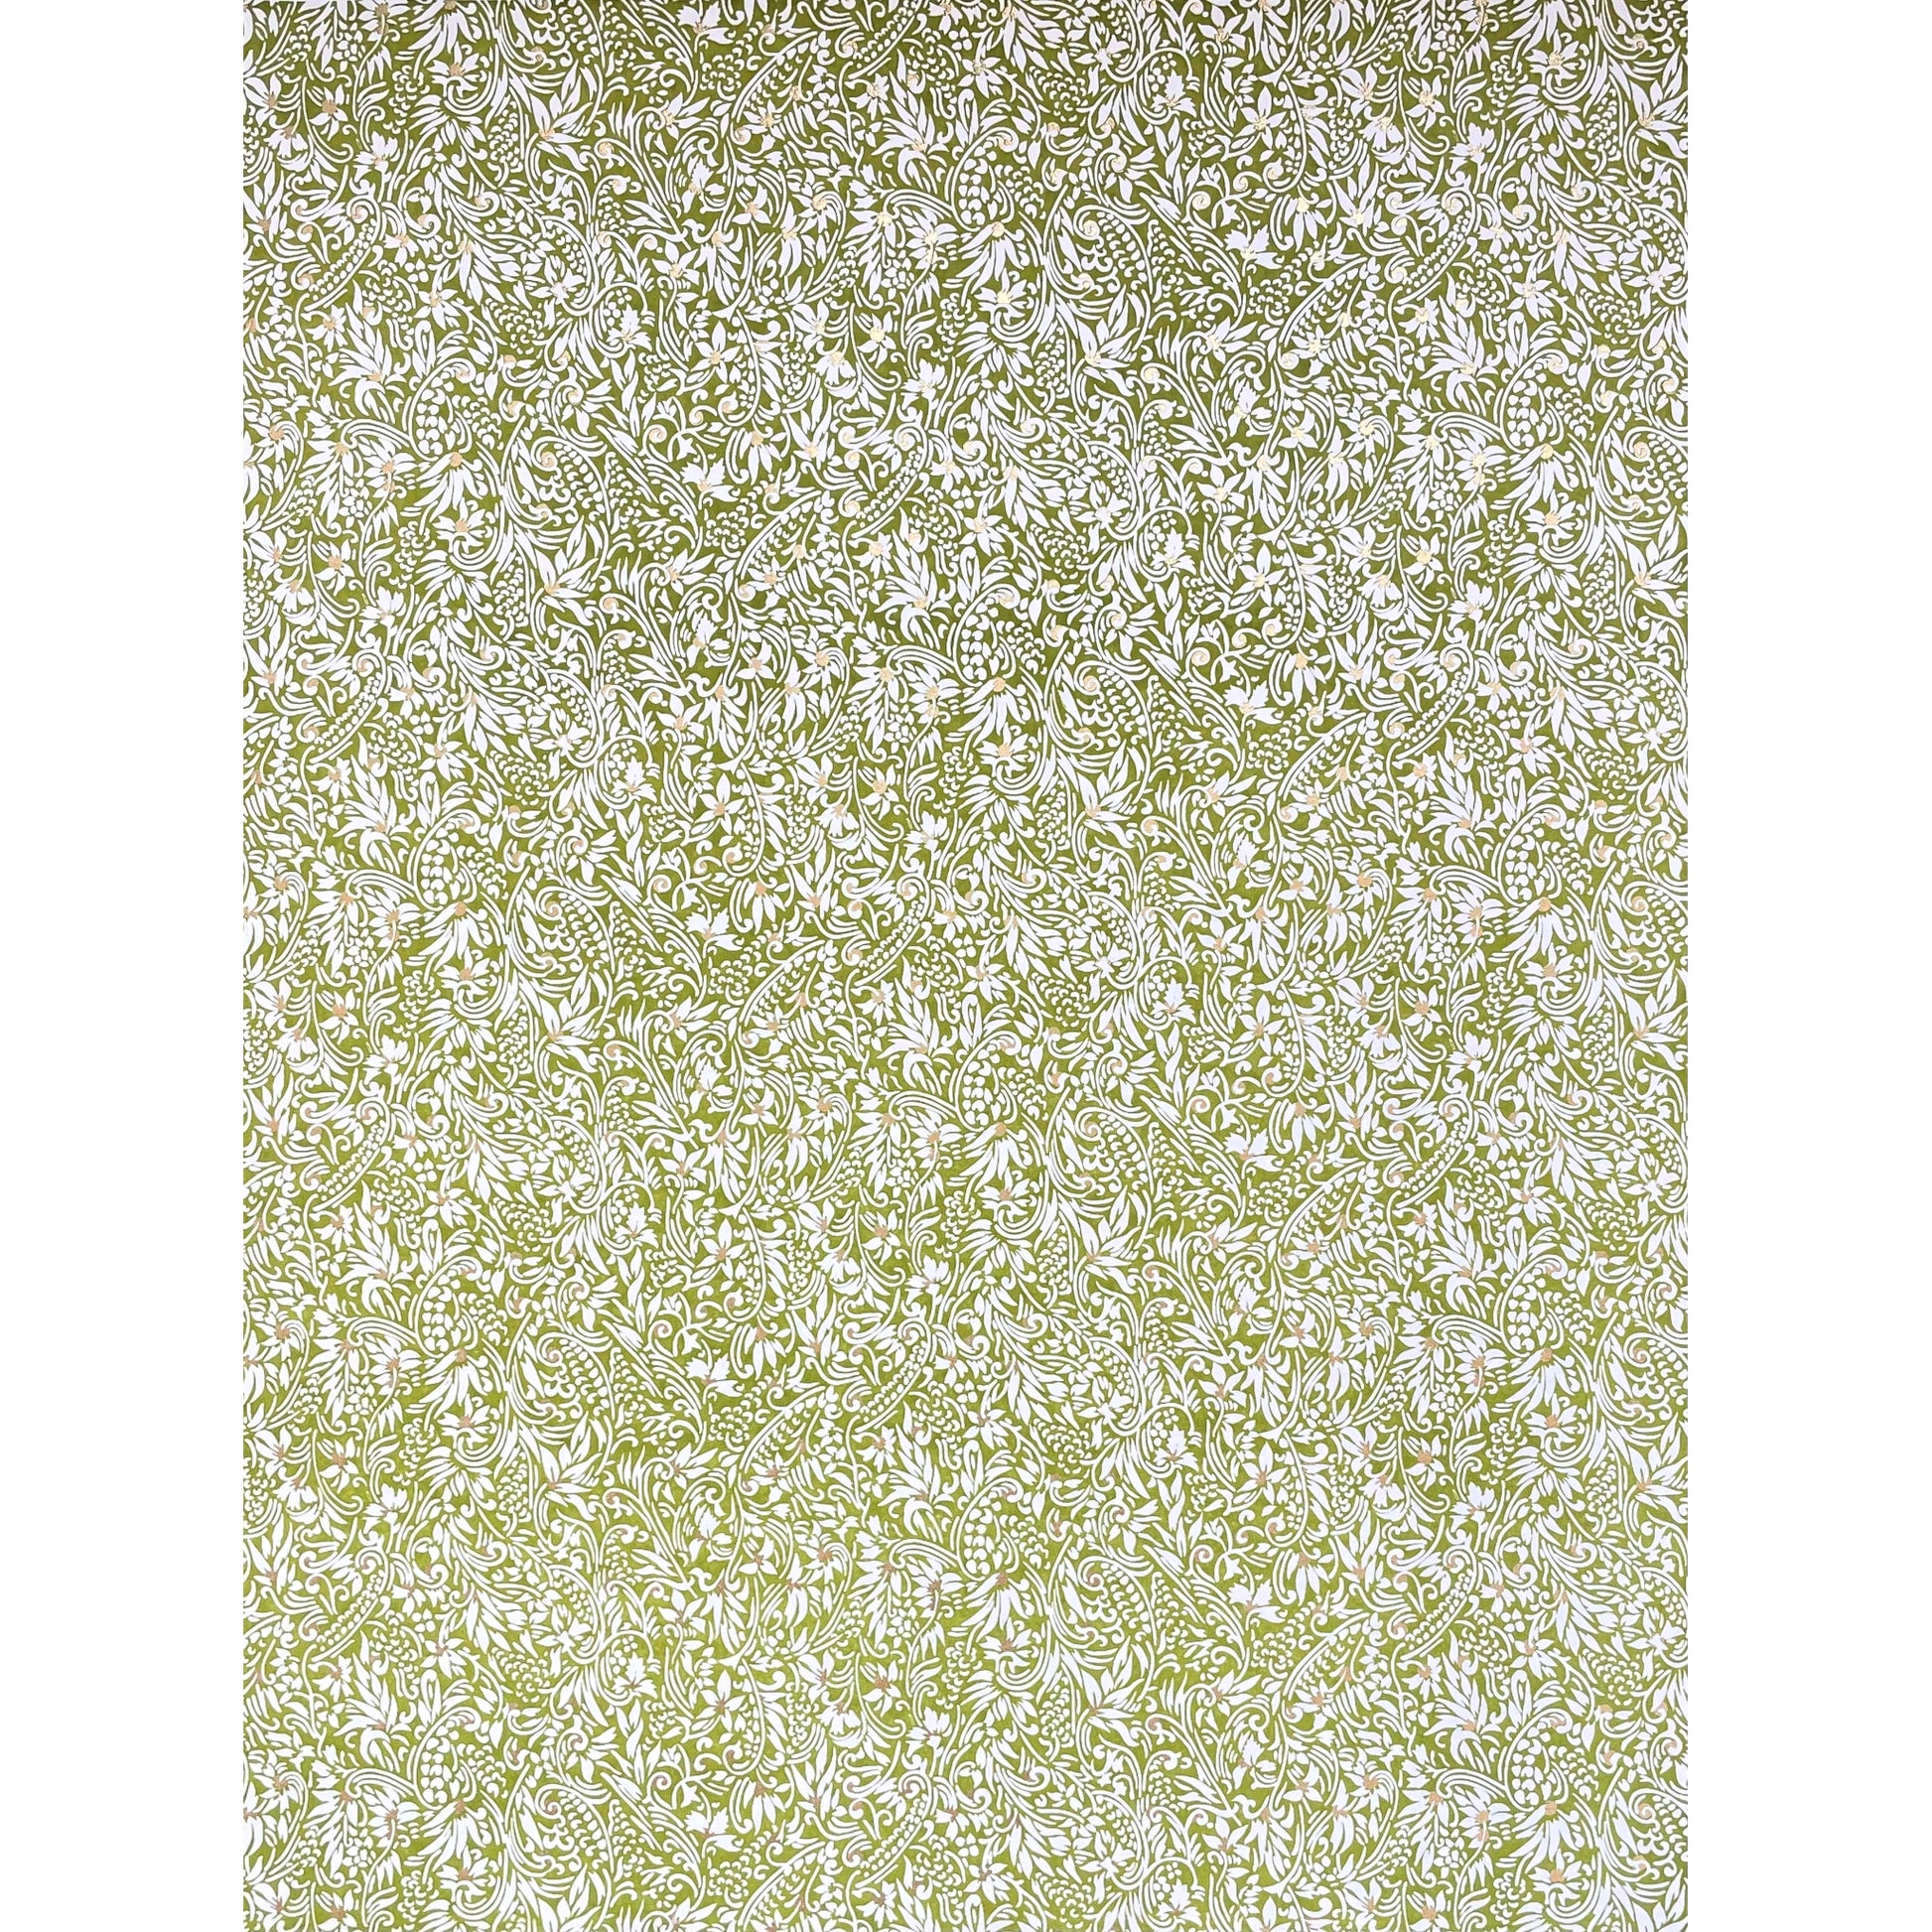 japanese silk-screen handmade paper showing green and white botanical repeat pattern with gold highlights, full sheet view